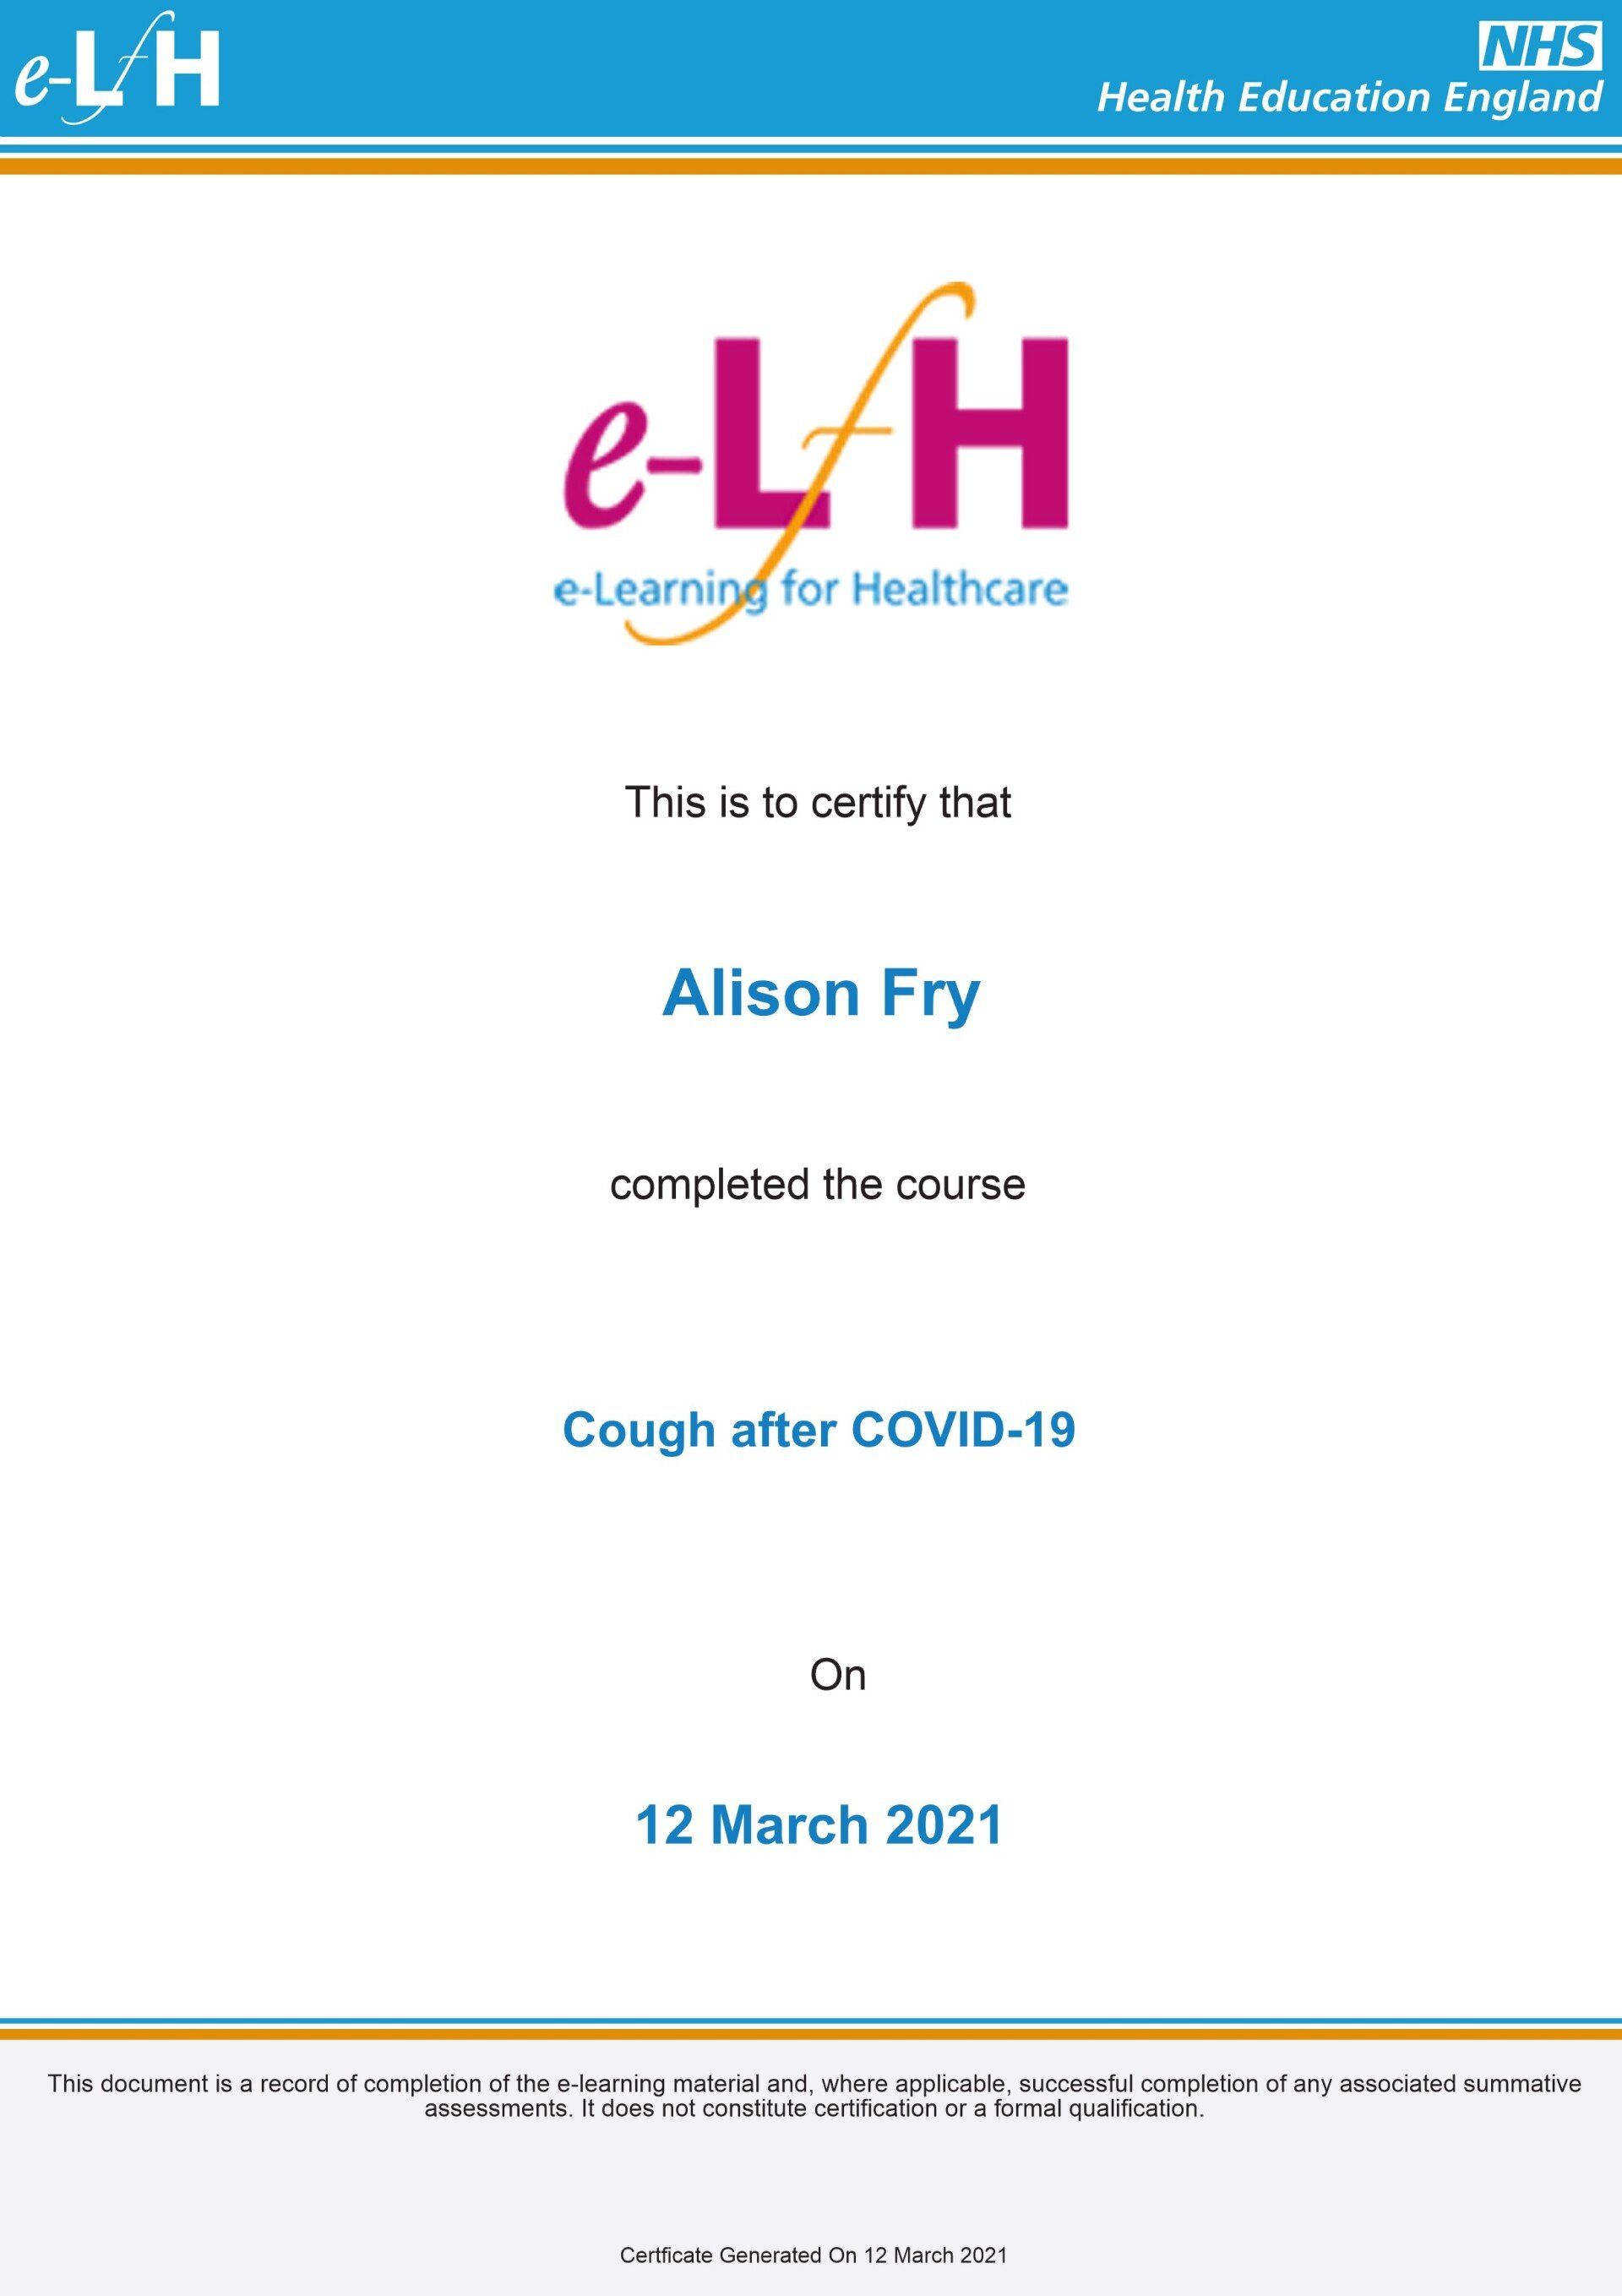 Cough after COVID-19 - 12th March 2021